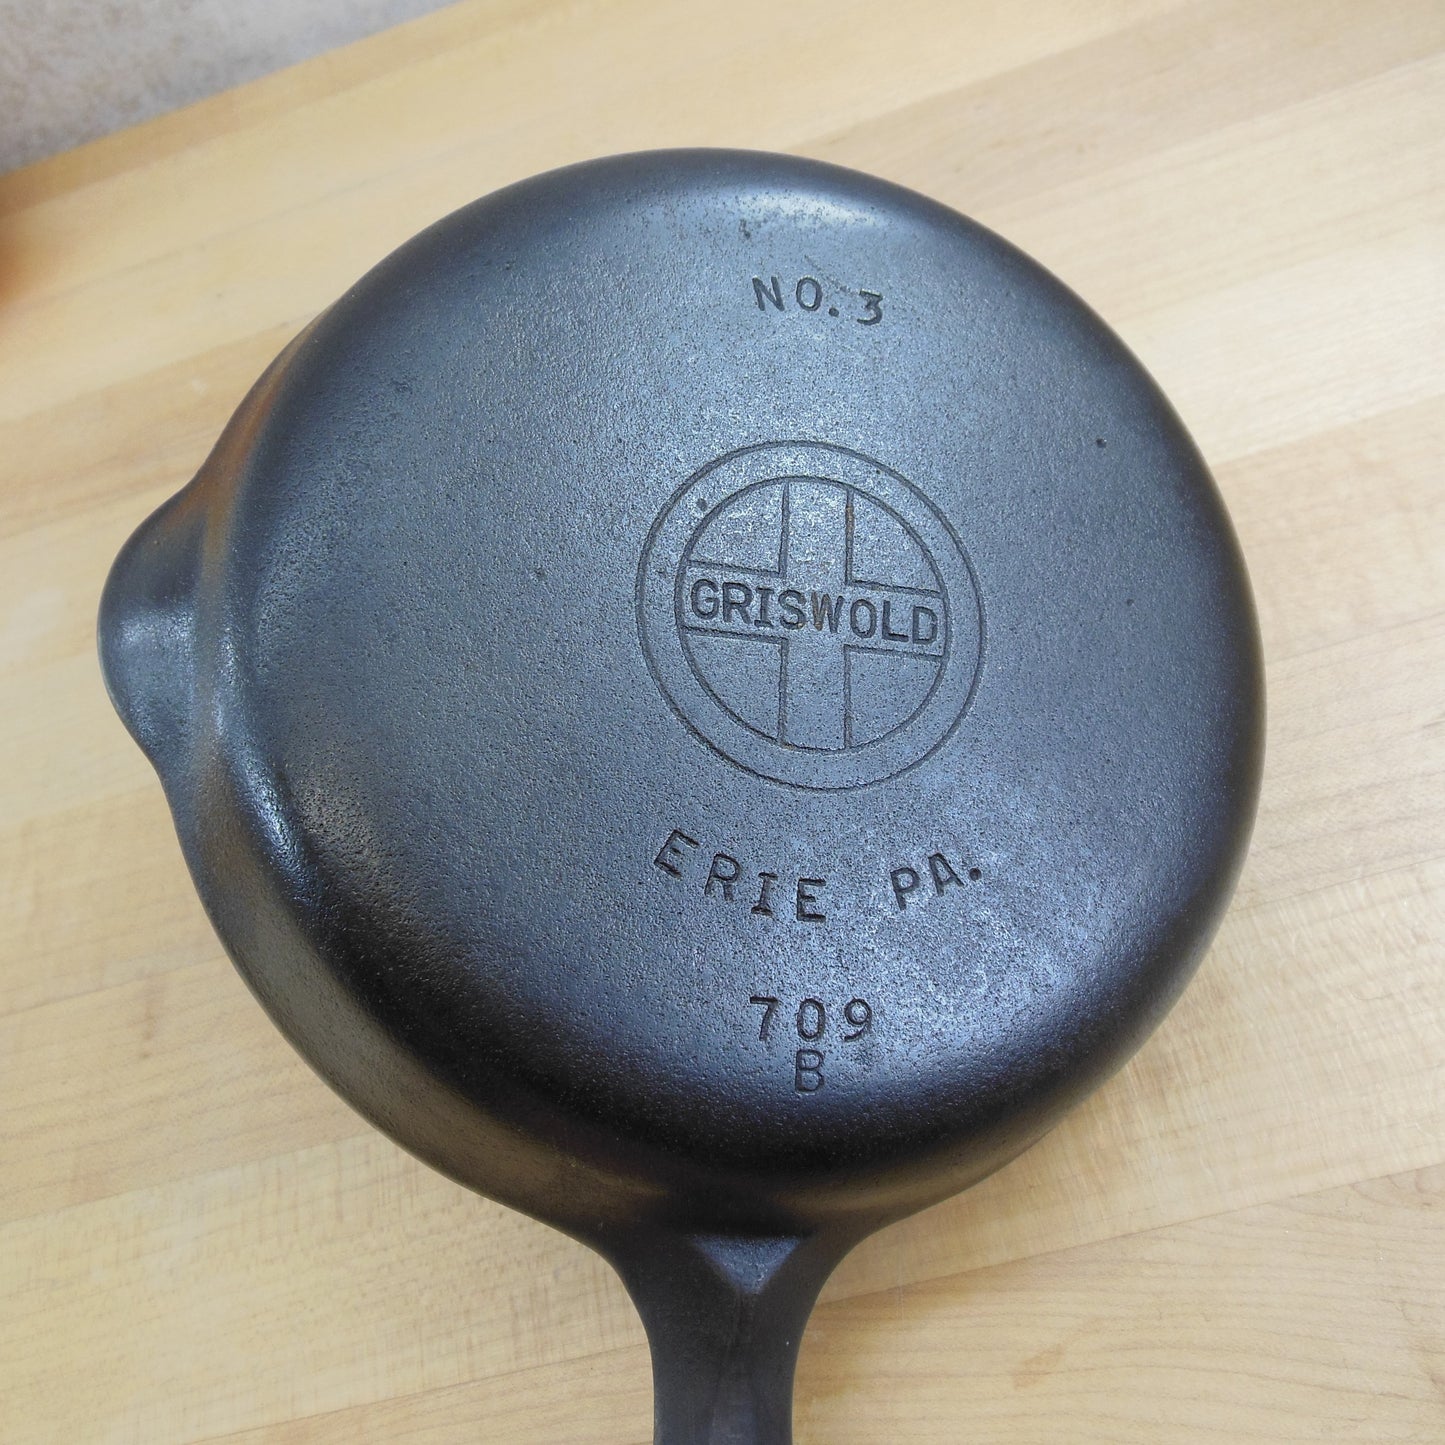 Griswold No. 3 Cast Iron Skillet 709 Small Logo Badge Restored Used